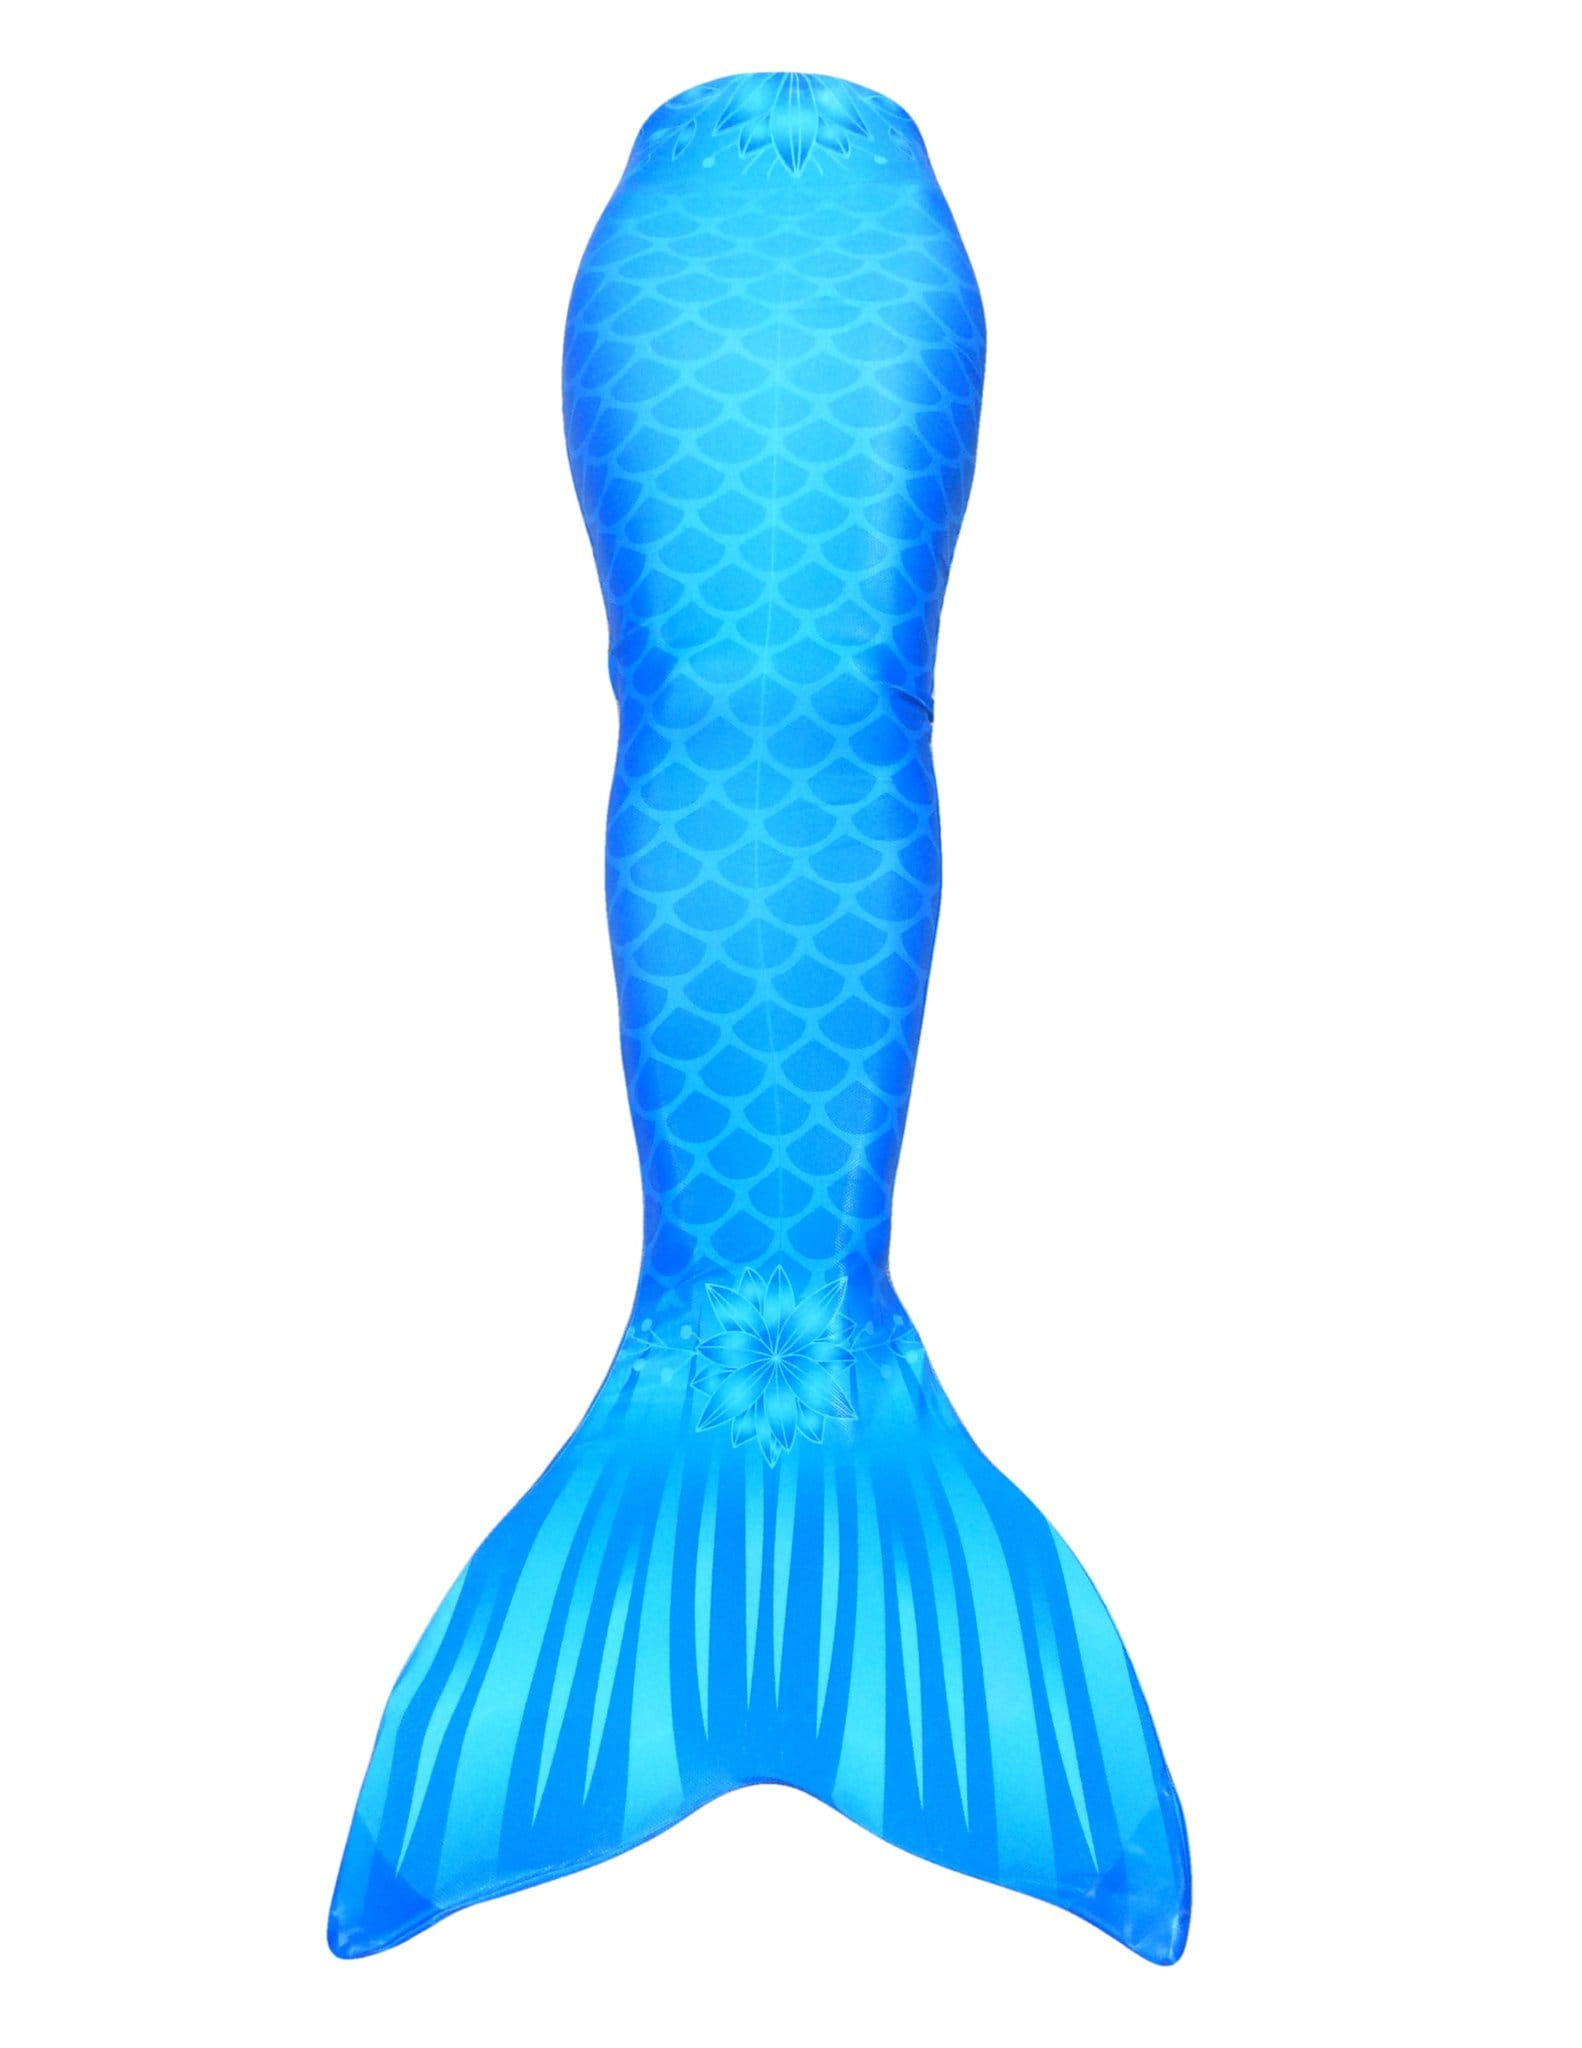 blue mermaid tail that is the perfect fabric mermaid tail for kids or adults